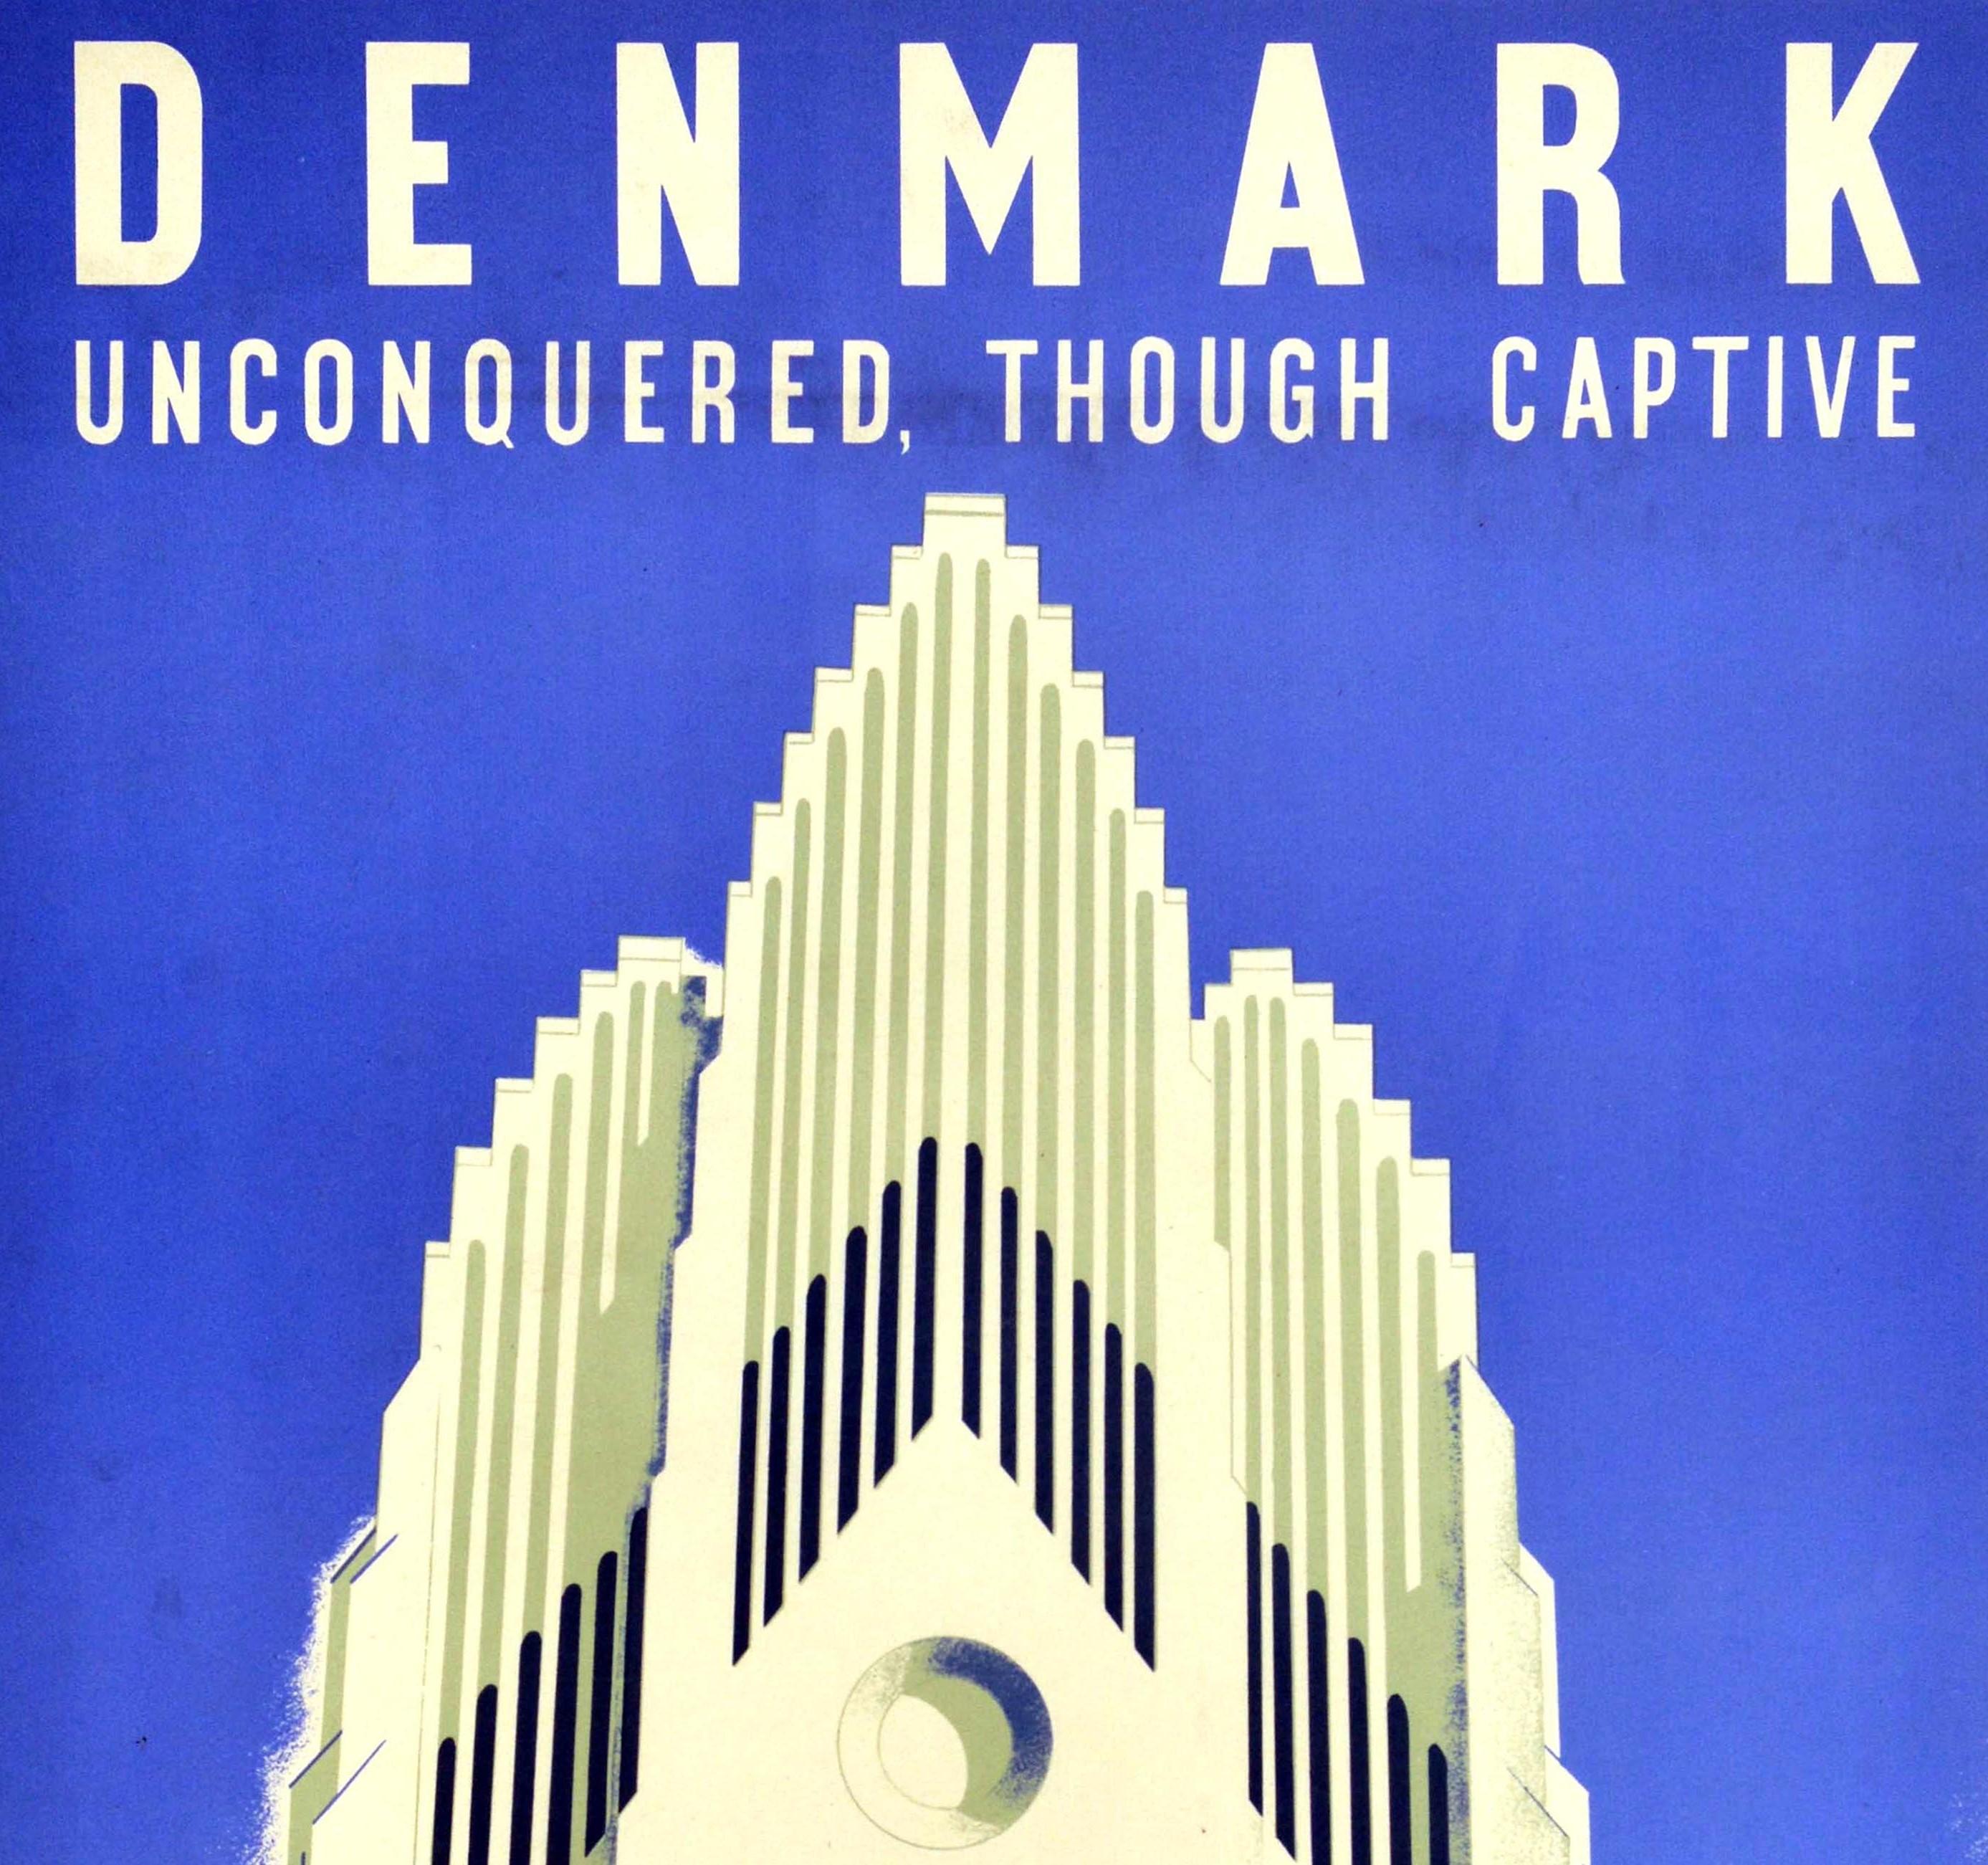 Original Vintage Poster Denmark Unconquered Though Captive WWII Grundtvig Church - Print by Aage W. Jorgensen